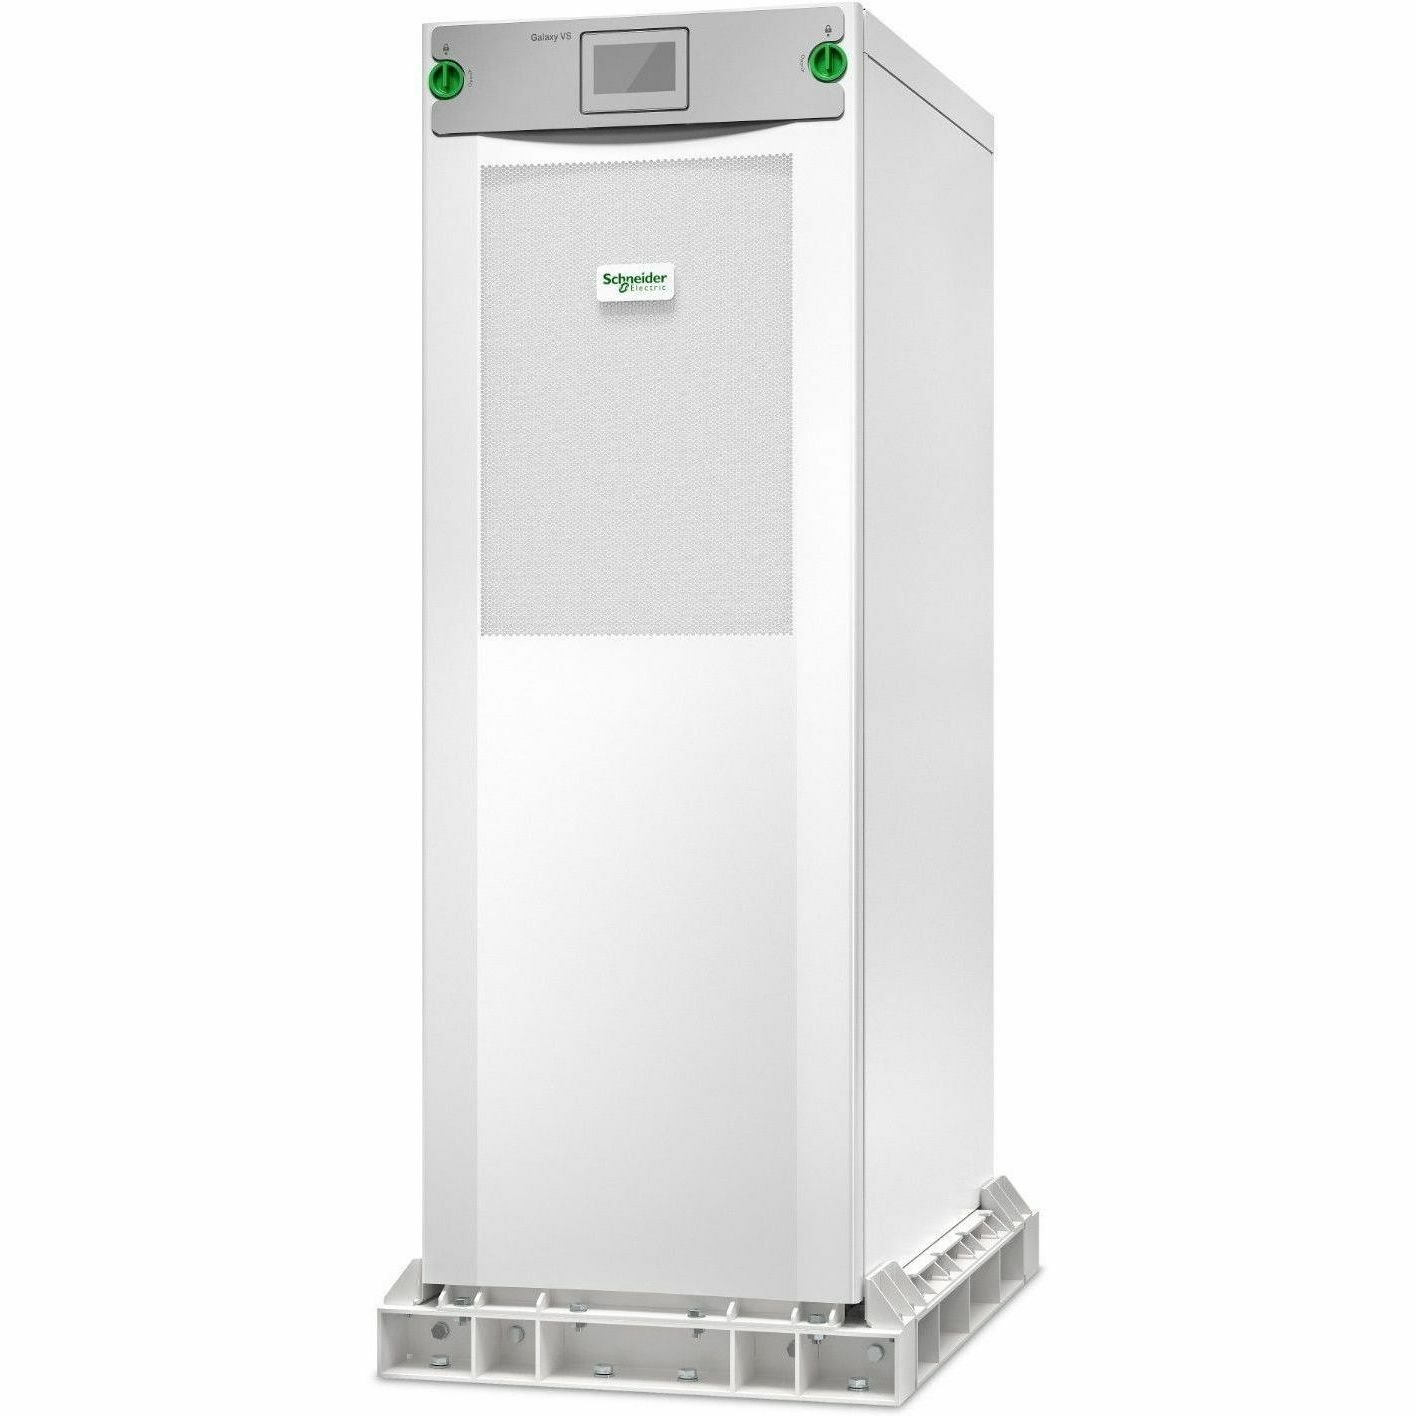 APC by Schneider Electric Galaxy VS Double Conversion Online UPS - 30 kVA/30 kW - Three Phase